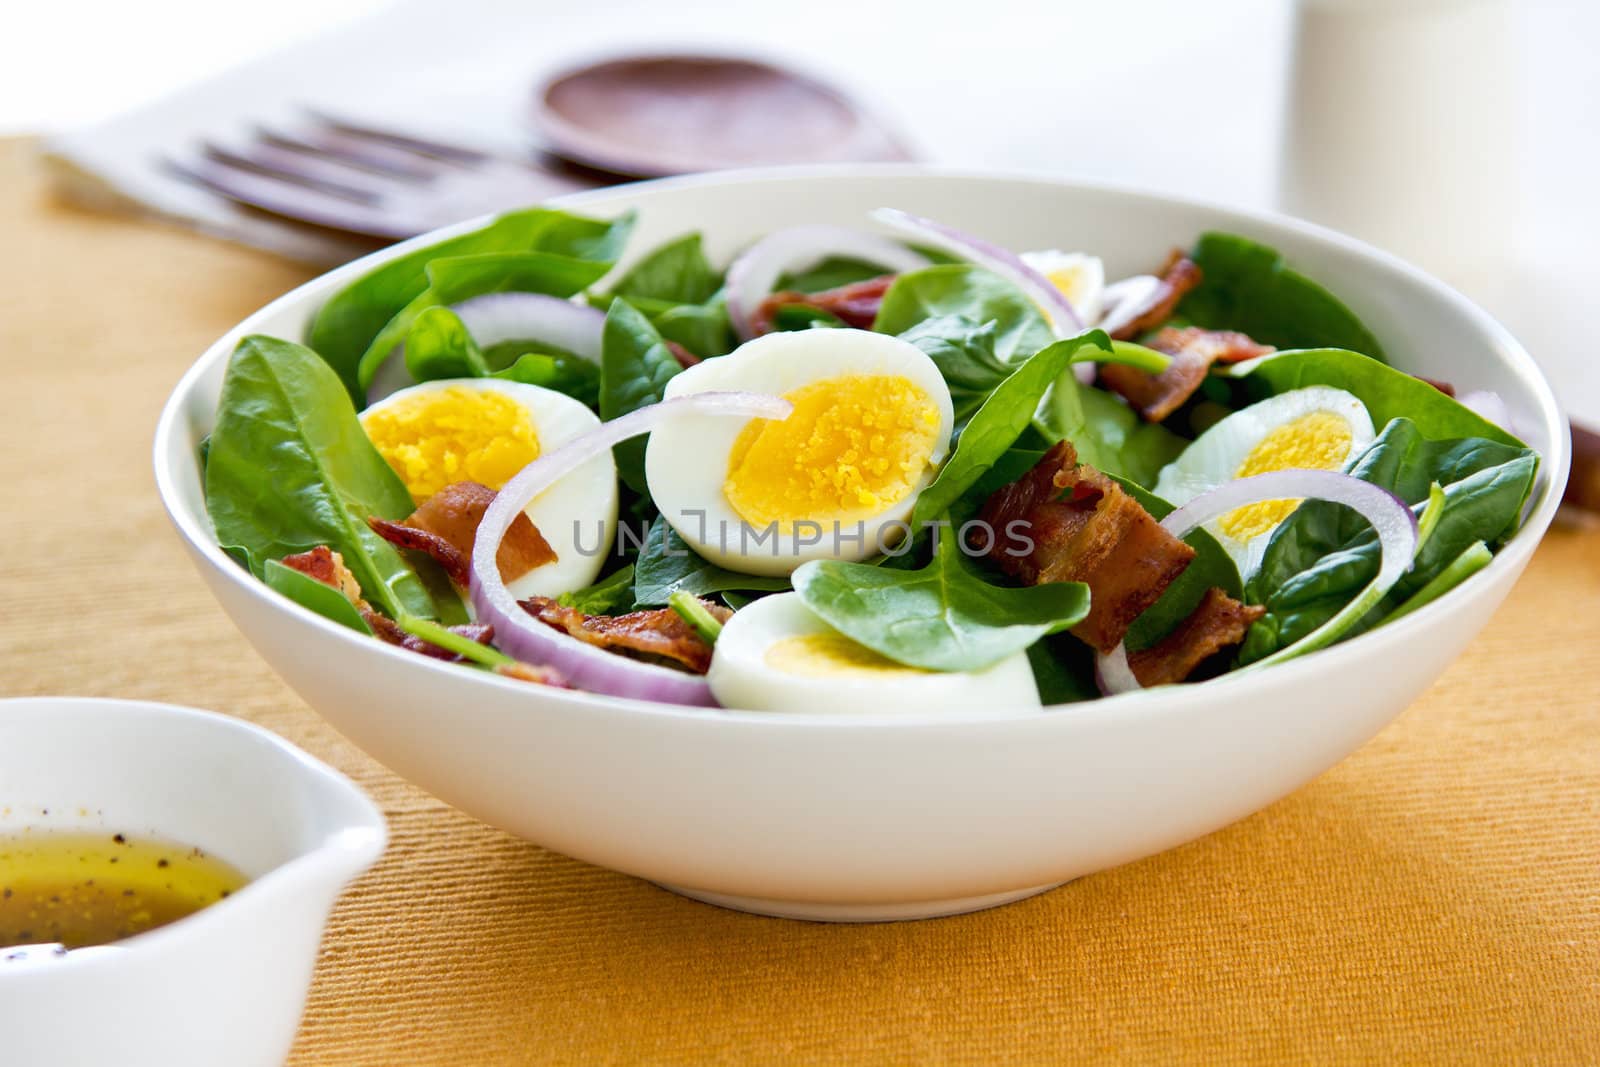 Bacon with boiled egg and spinach salad by salad dressing